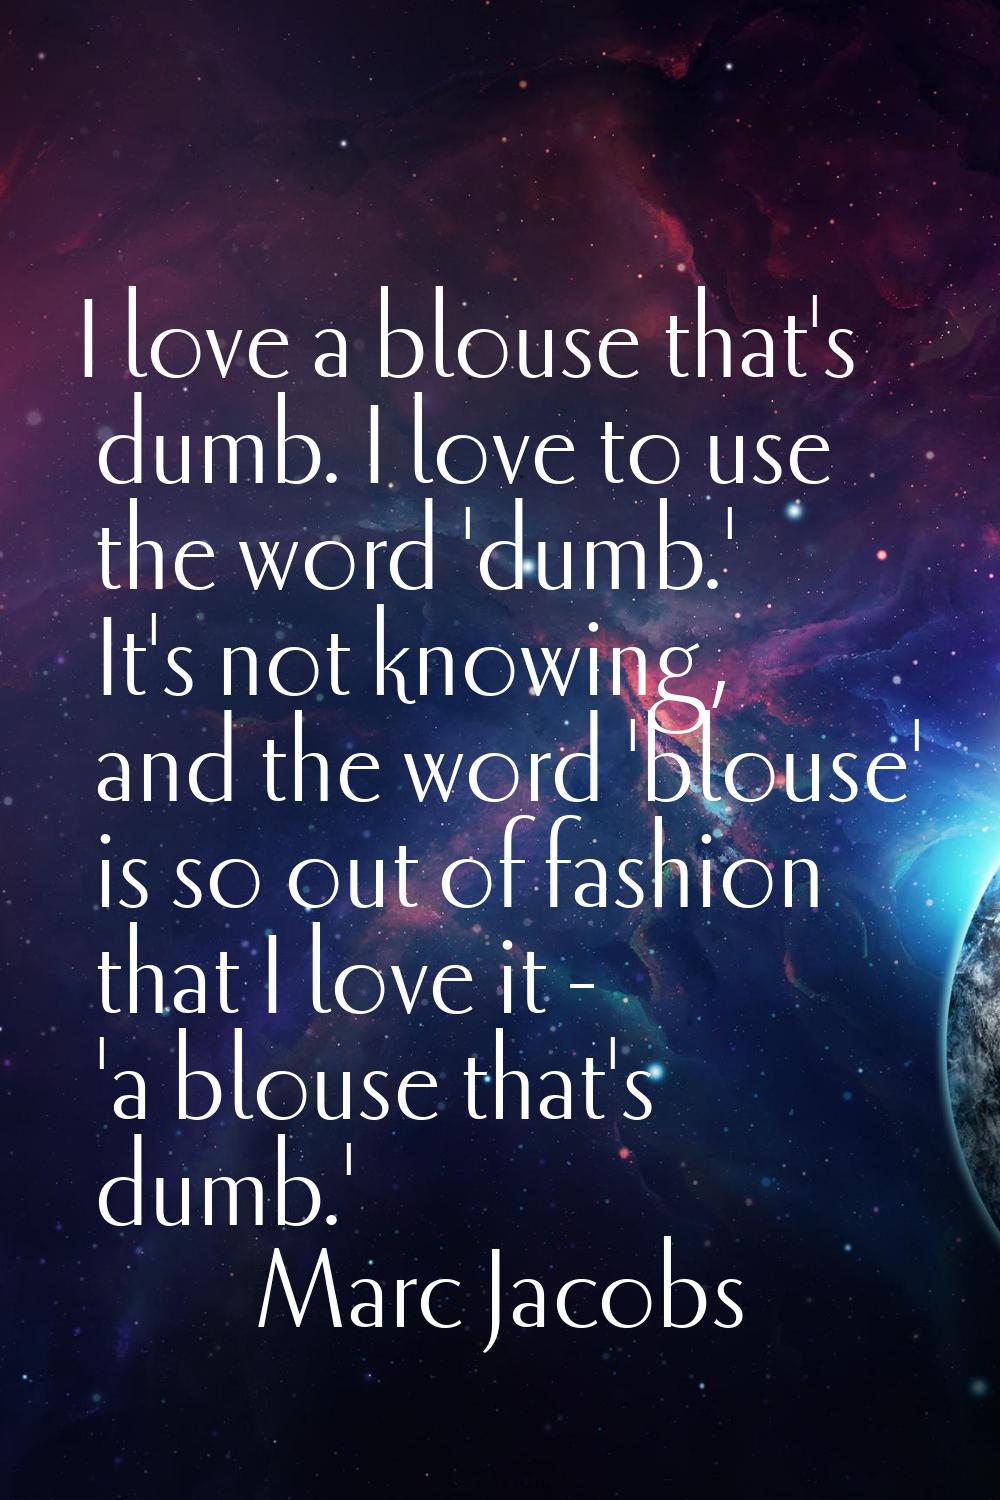 I love a blouse that's dumb. I love to use the word 'dumb.' It's not knowing, and the word 'blouse'